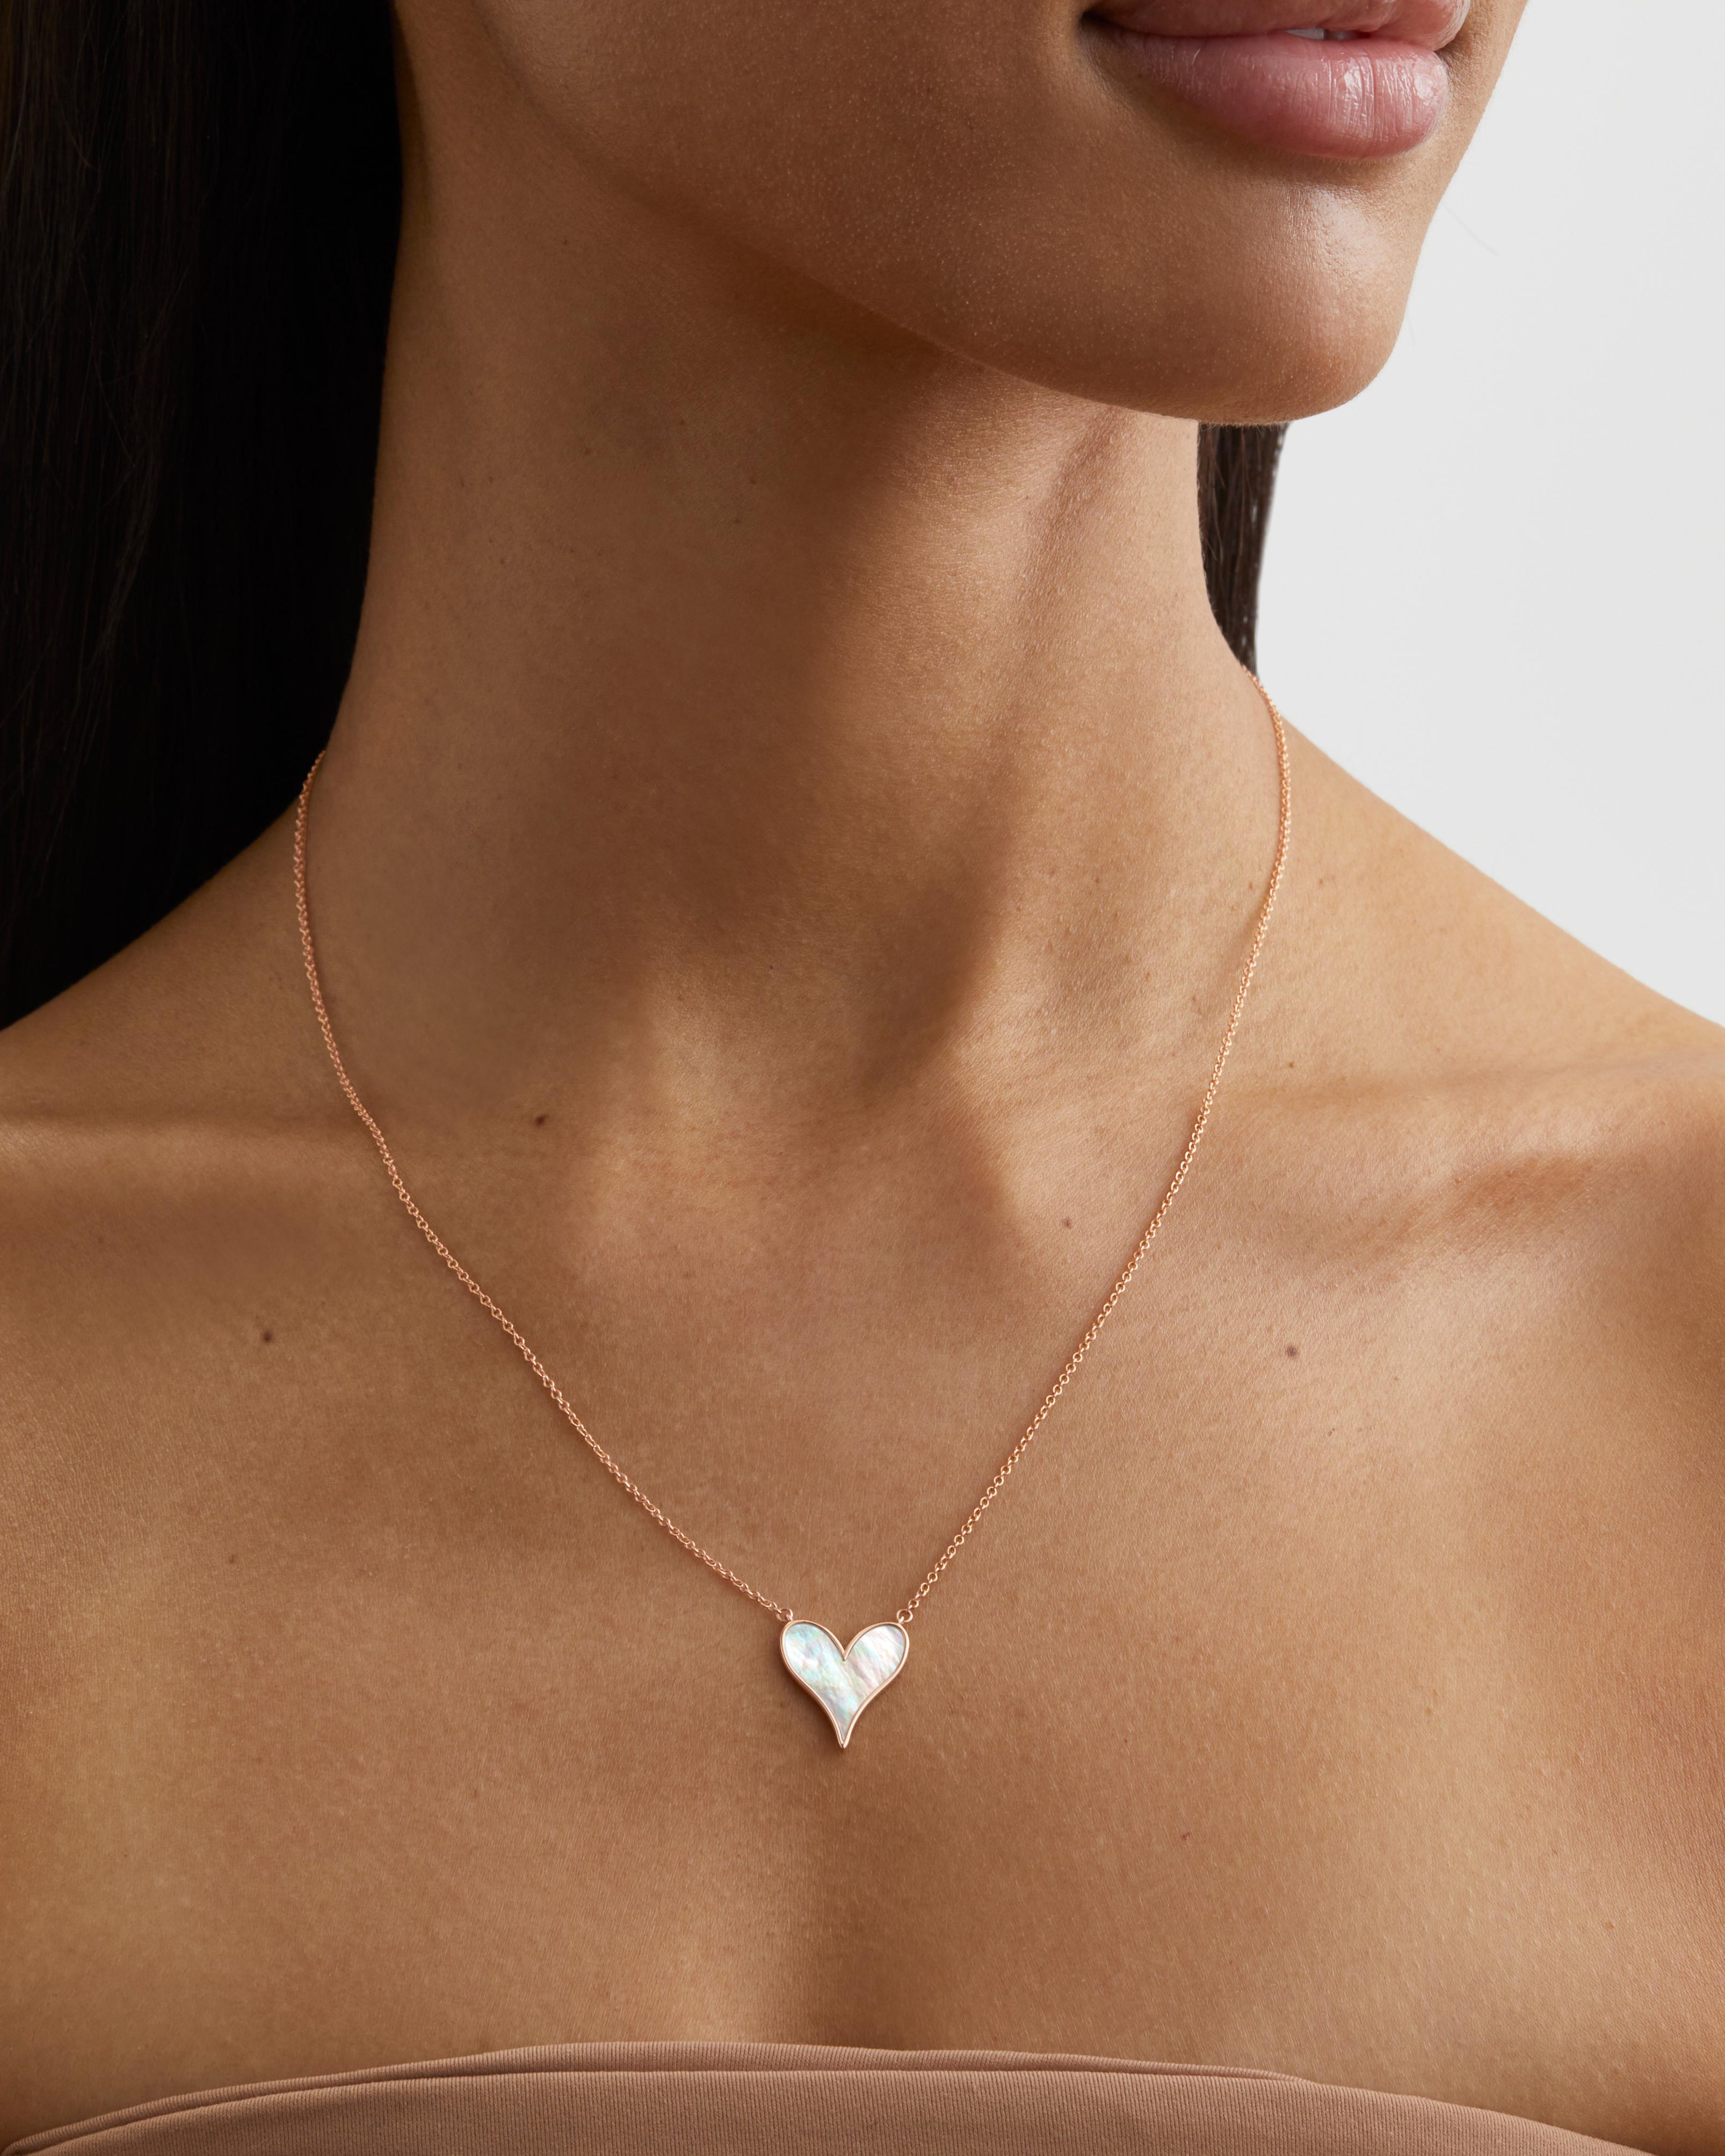 The perfect Heart Pendant. Roseate envisions a heart as twin water drops, joined in love and inlaid with carved mother-of-pearl. To give and wear as sentiment and style.

- 18k Rose Gold
- White Mother-of-Pearl, 15mm
- Mother-of-Pearl responsibly